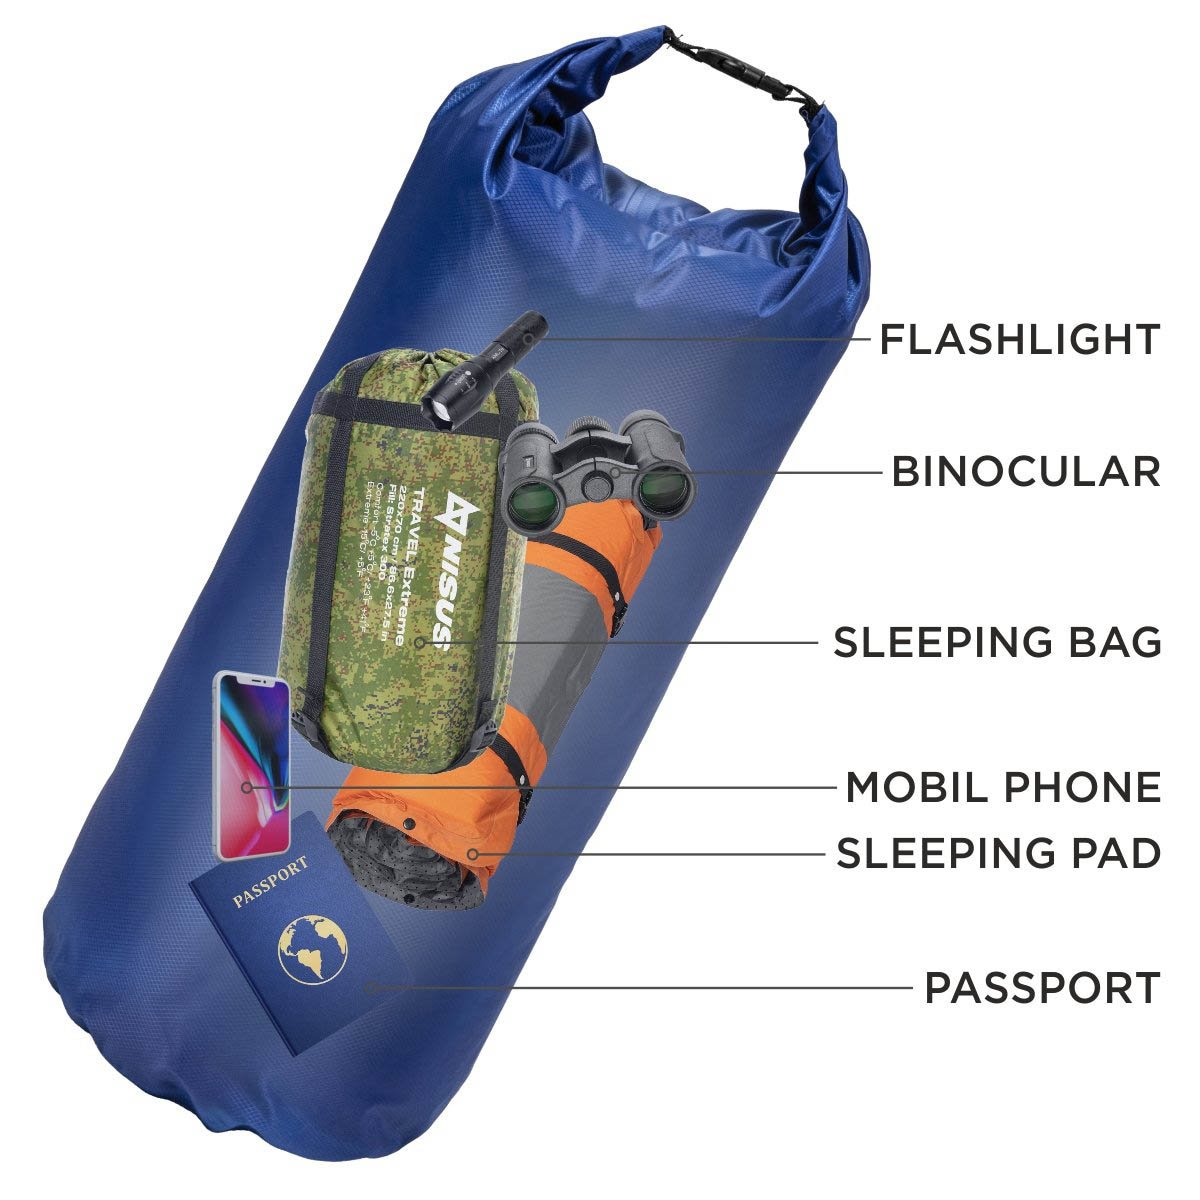 You could store flashlight, a binocular, a sleeping bag, a sleeping pad, documents and mobile phone into the 20 L Blue Polyester Waterproof Dry Bag for Fishing, Kayaking with no risk